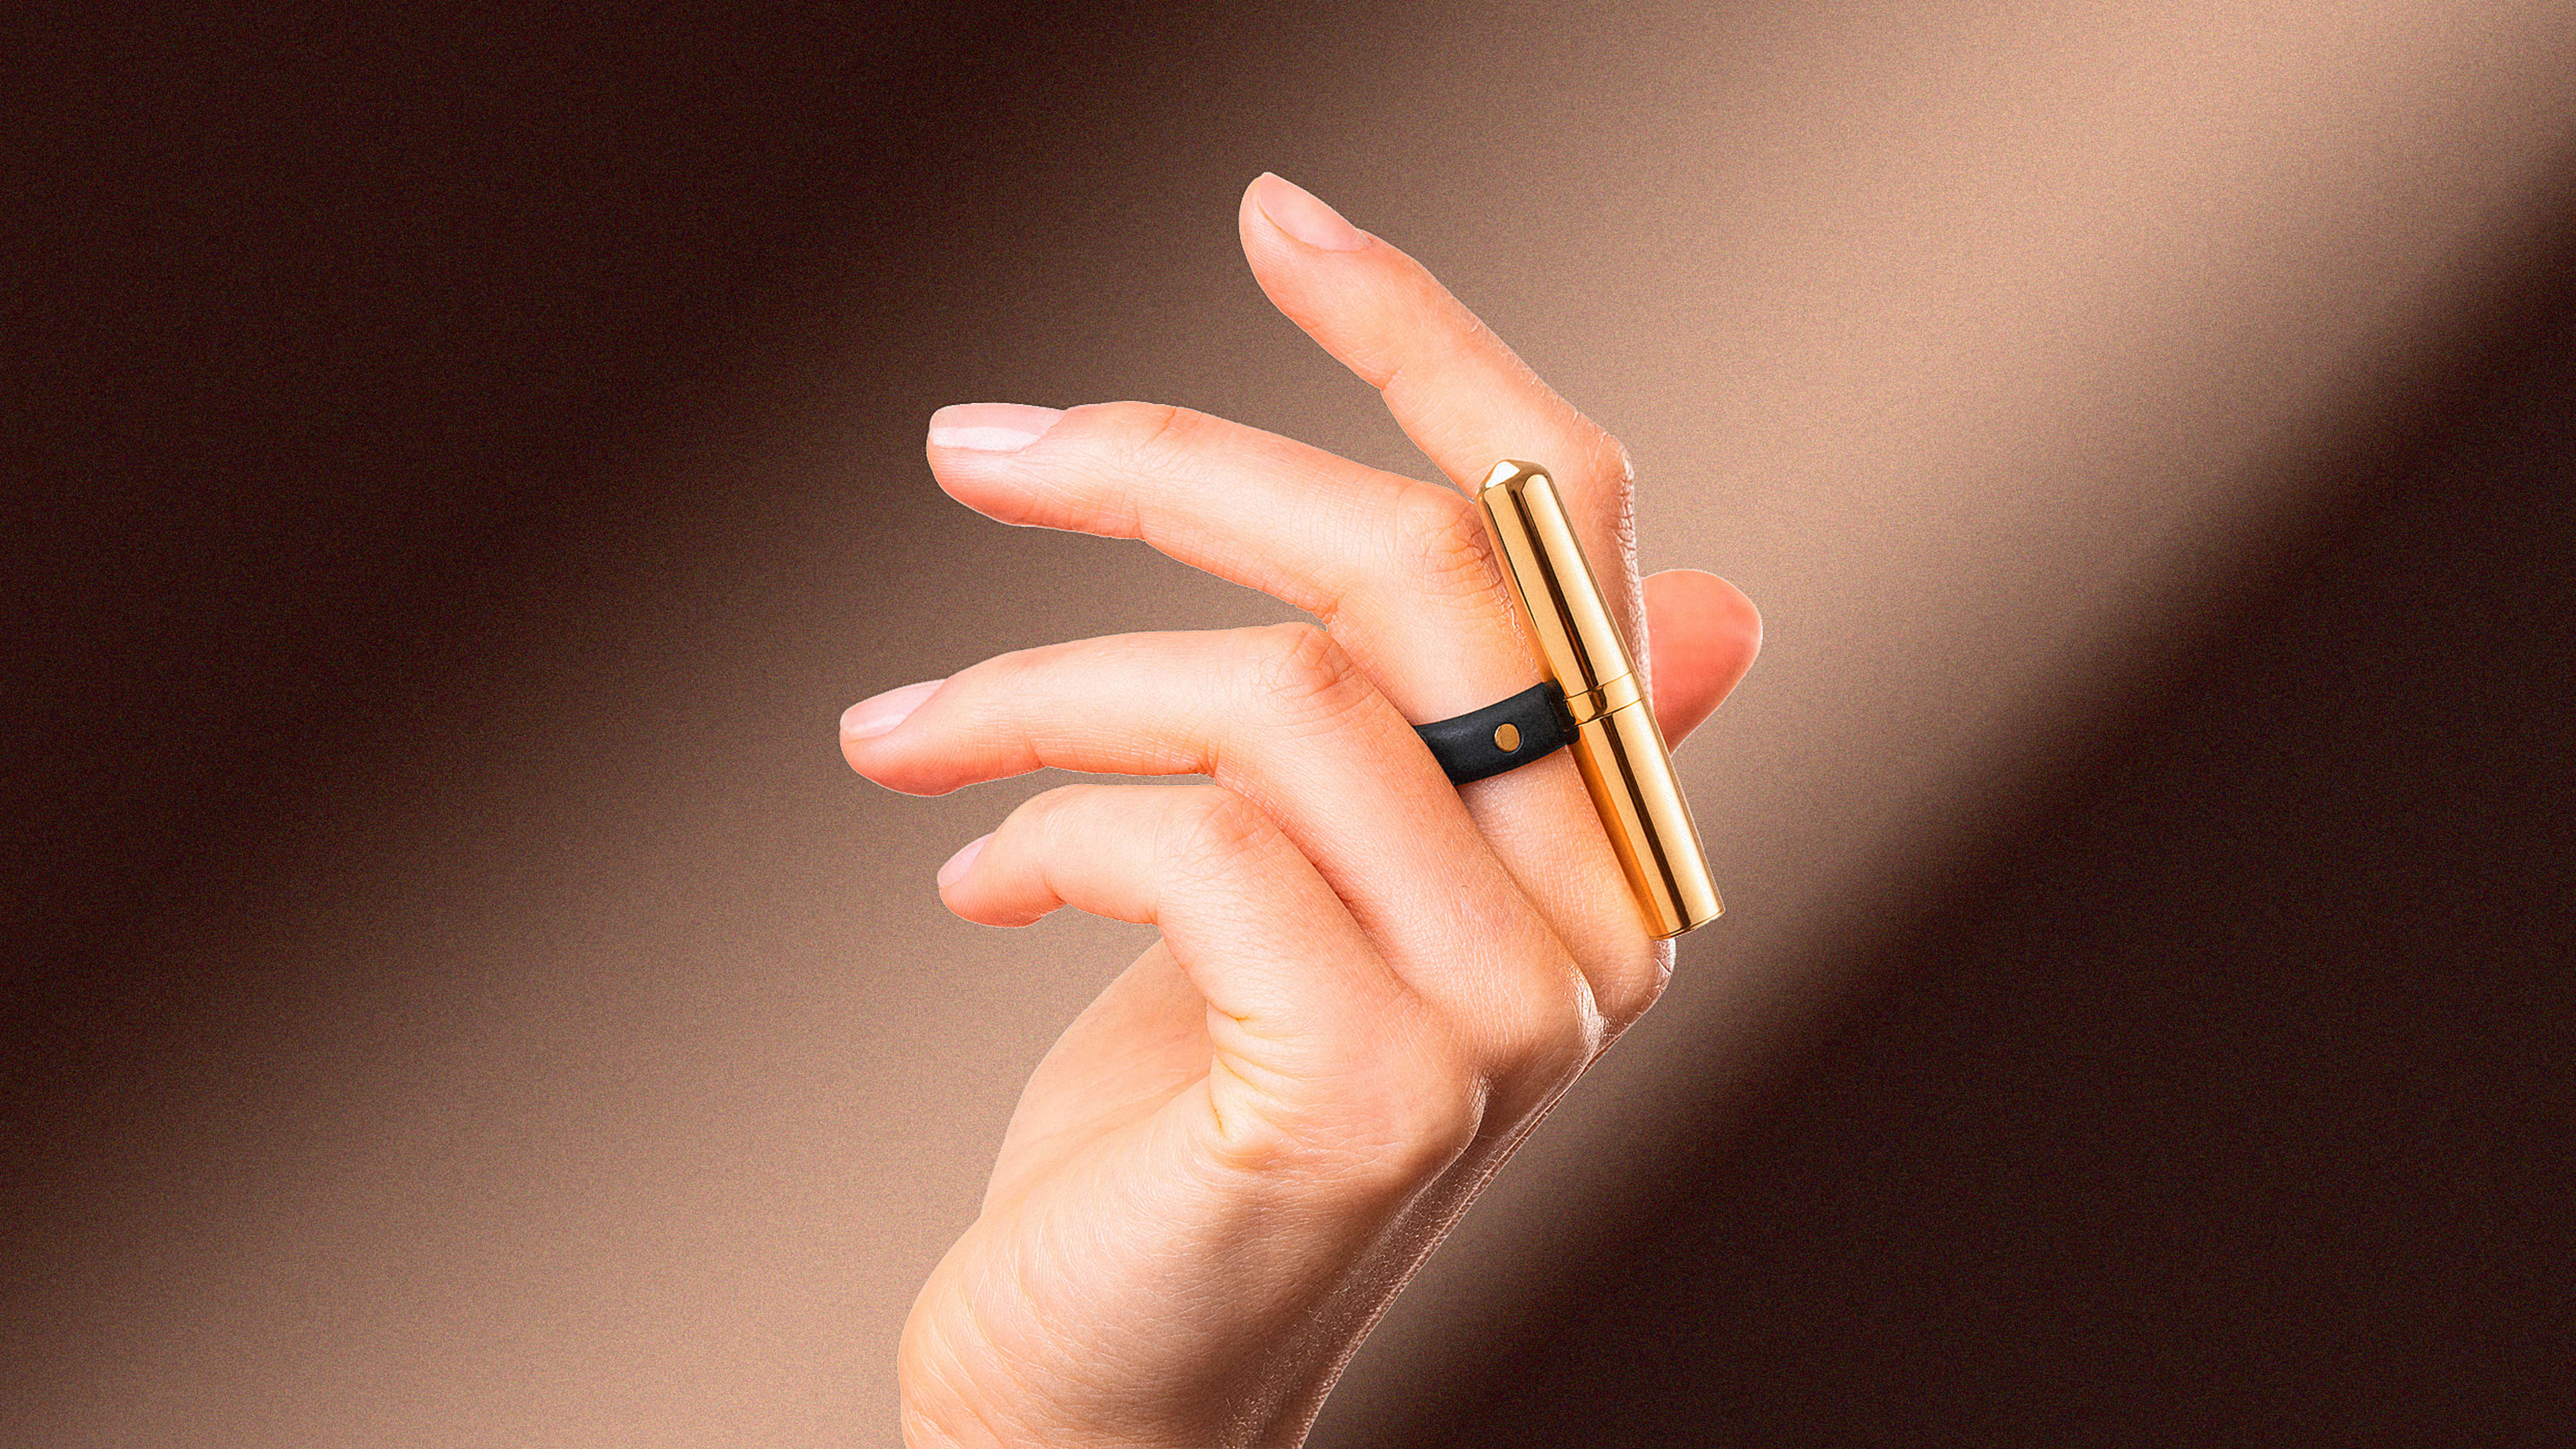 This $280 gold-plated ring is actually a vibrator—and an engineering marvel